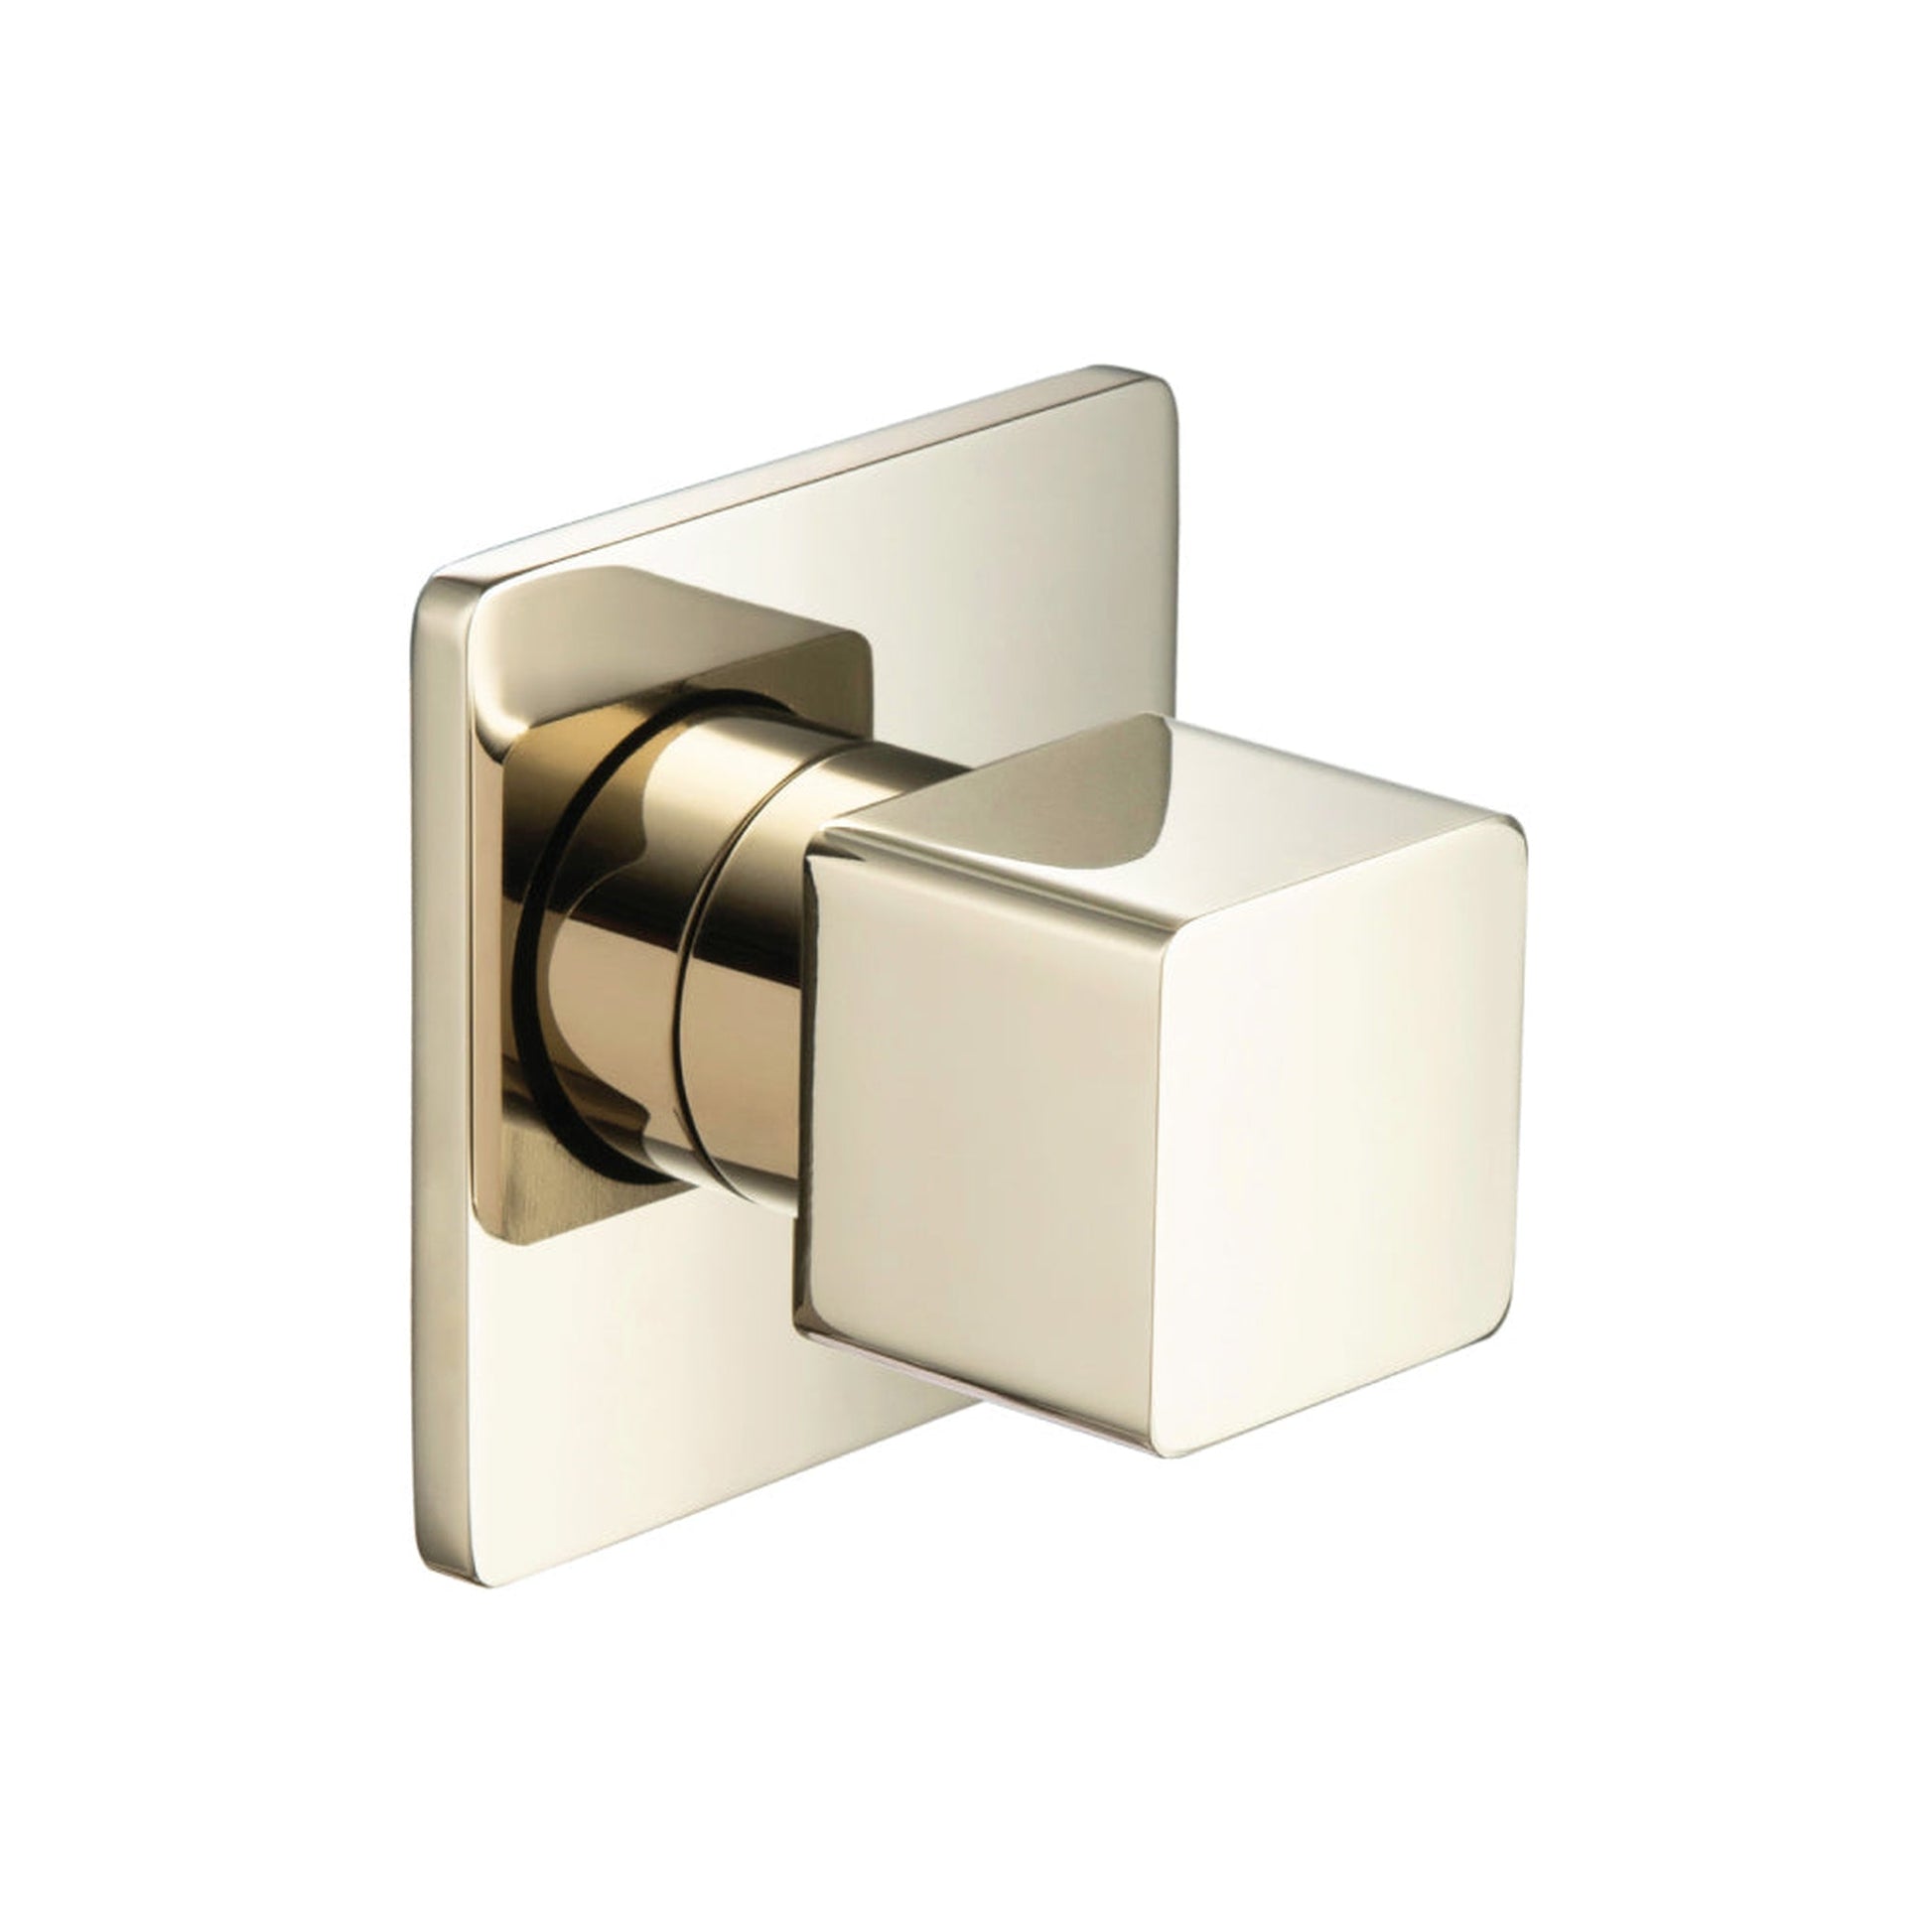 Isenberg Serie 196 3" Polished Nickel PVD Wall Mounted Volume Control Shower Faucet Valve Trim